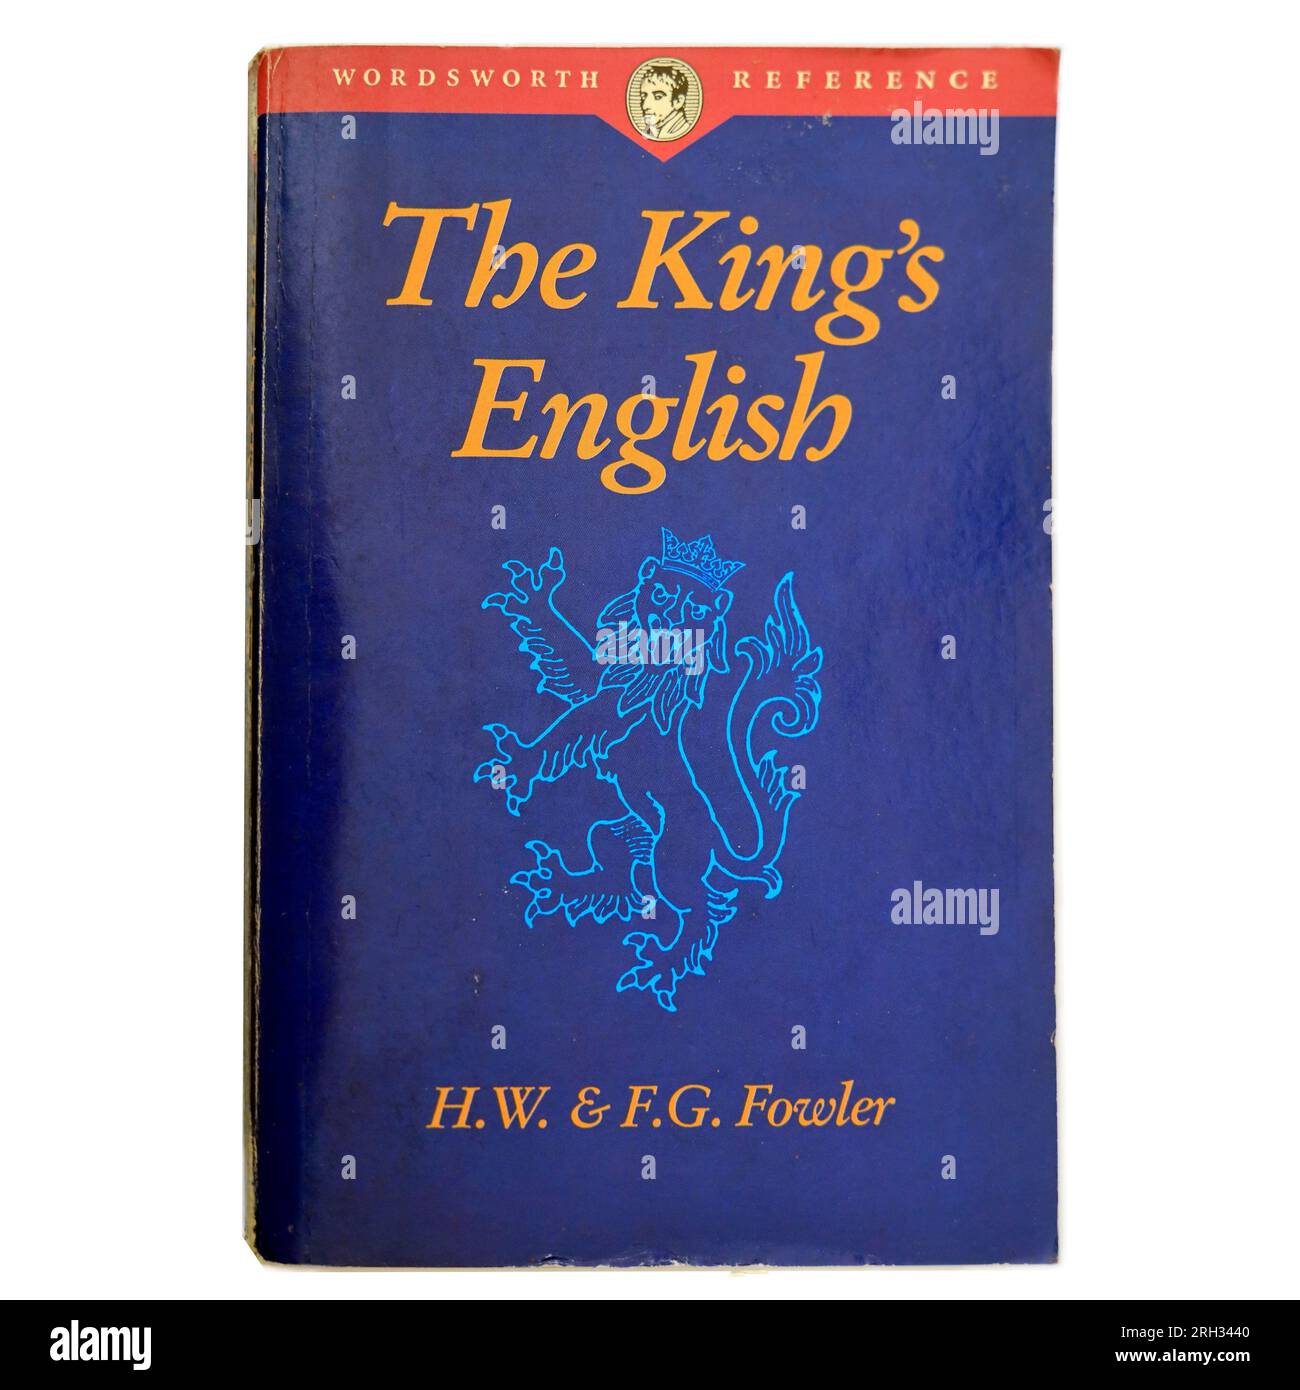 The King's English  by H W and F G Fowler. Book, Studio setup. August 2023. cym Stock Photo